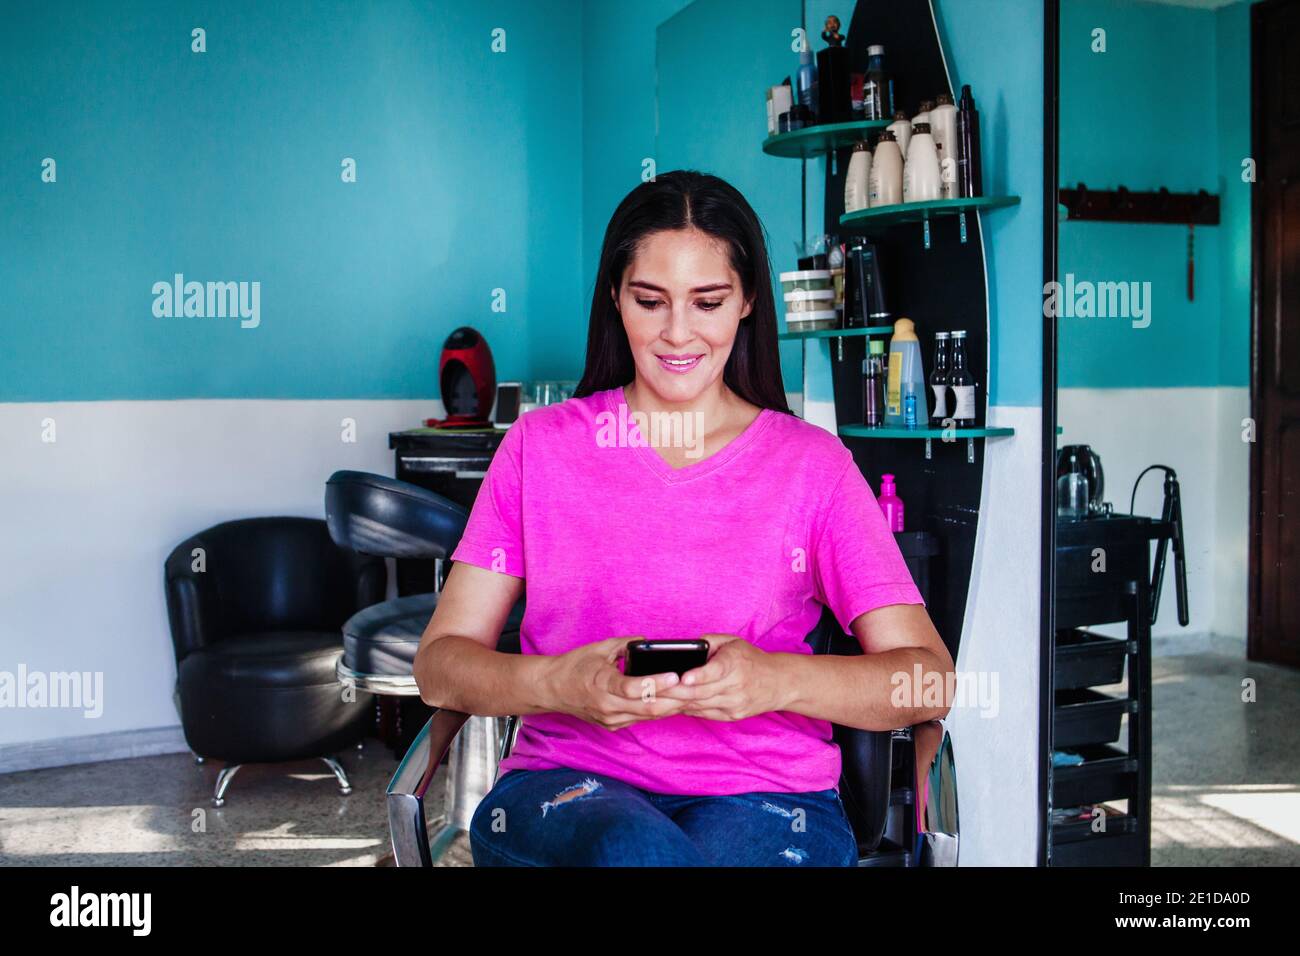 Latin woman who owns her haircut business in Mexico city Stock Photo